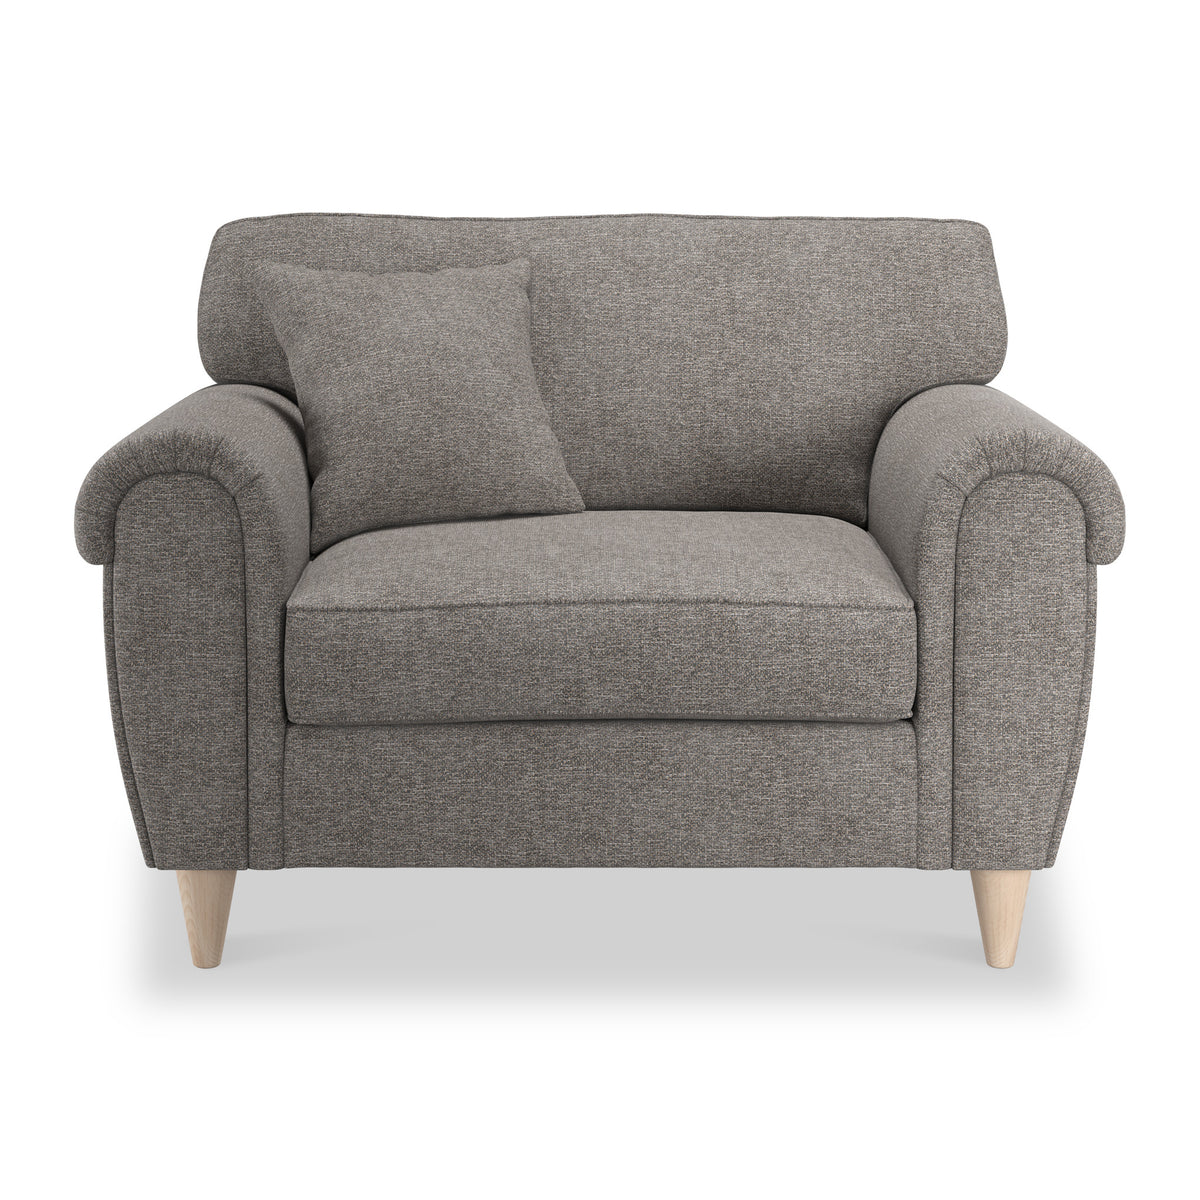 Harry Brown Snuggle Living Room Chair